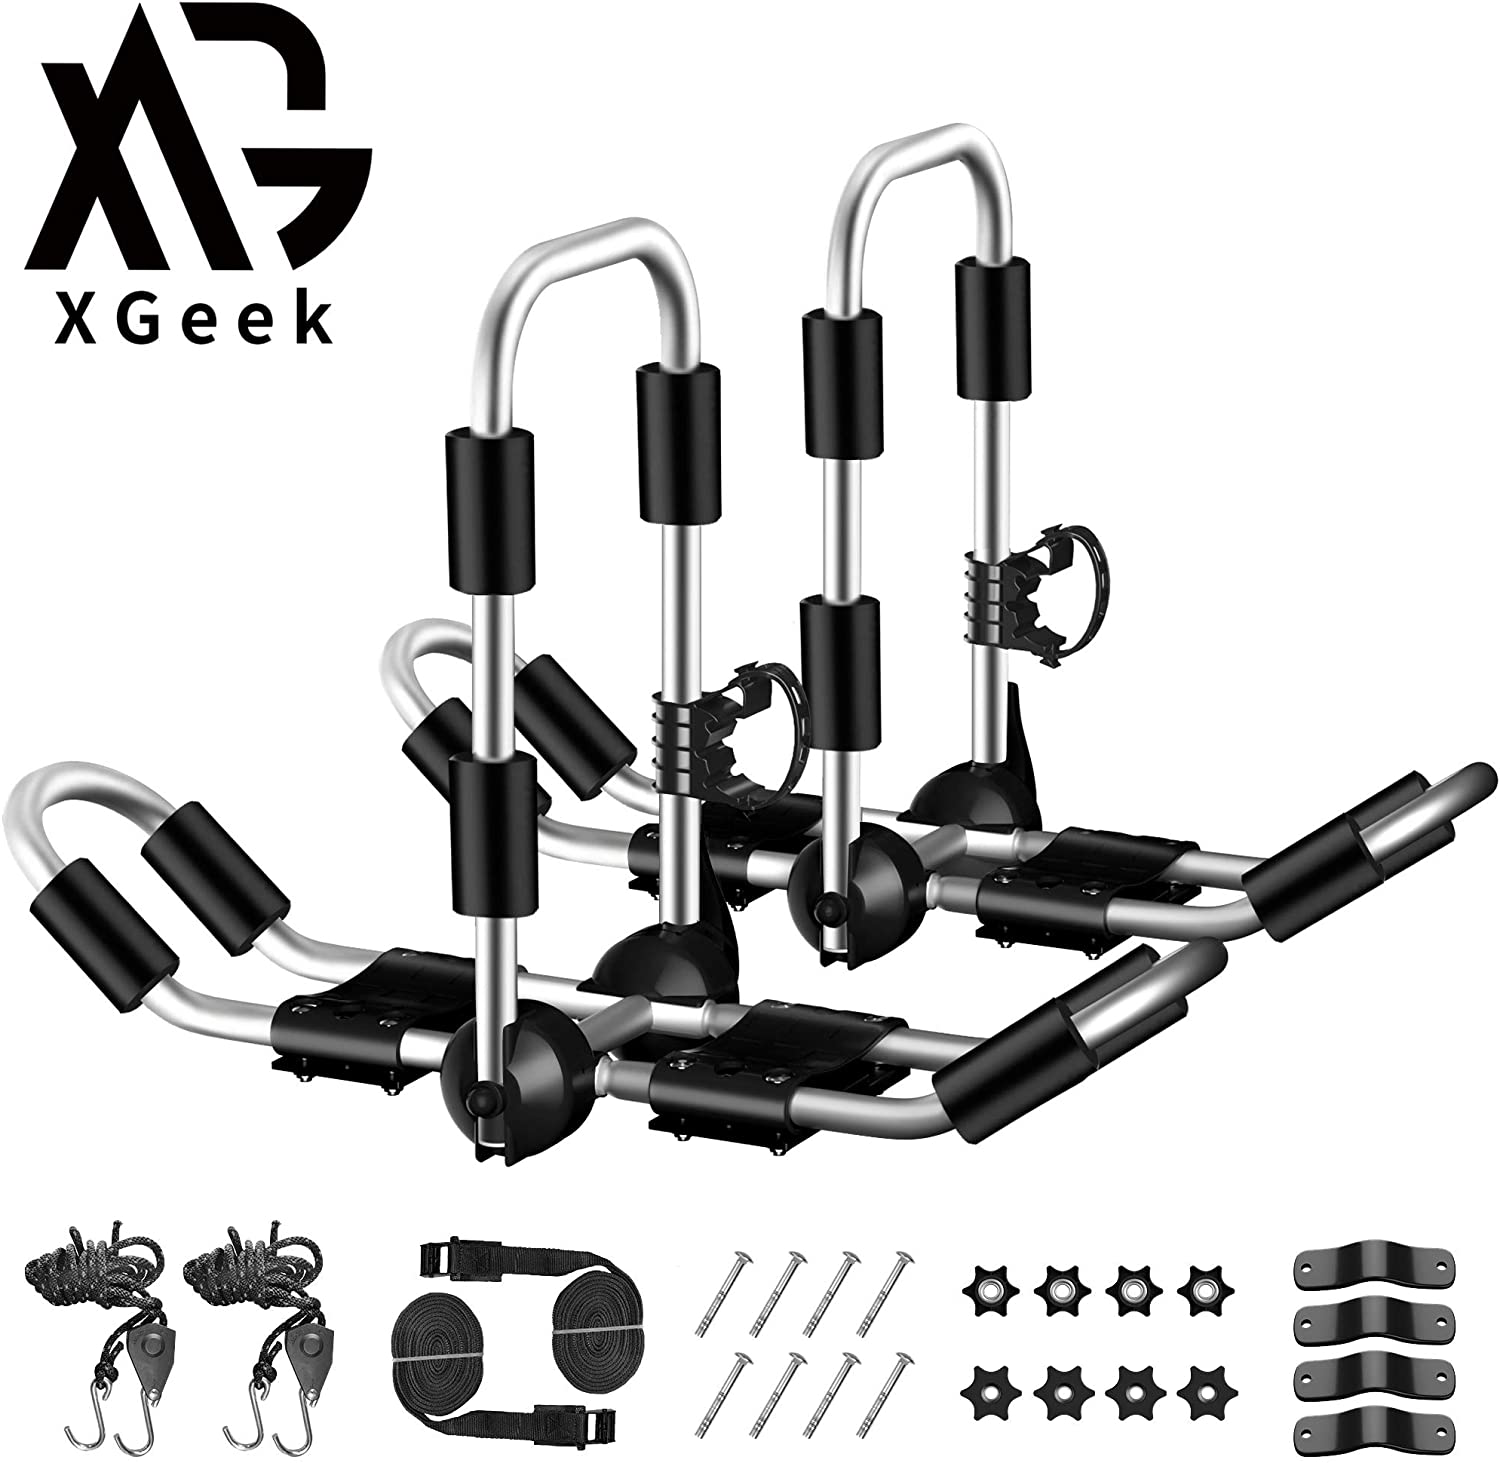 XGeek Kayak Roof Rack 4-in-1 for Kayak, Surfboard, Canoe and Ski Board Rooftop Mount Carrier Folding Adjustable Bilateral J-Style Rack on SUV, Car and Truck (silver)